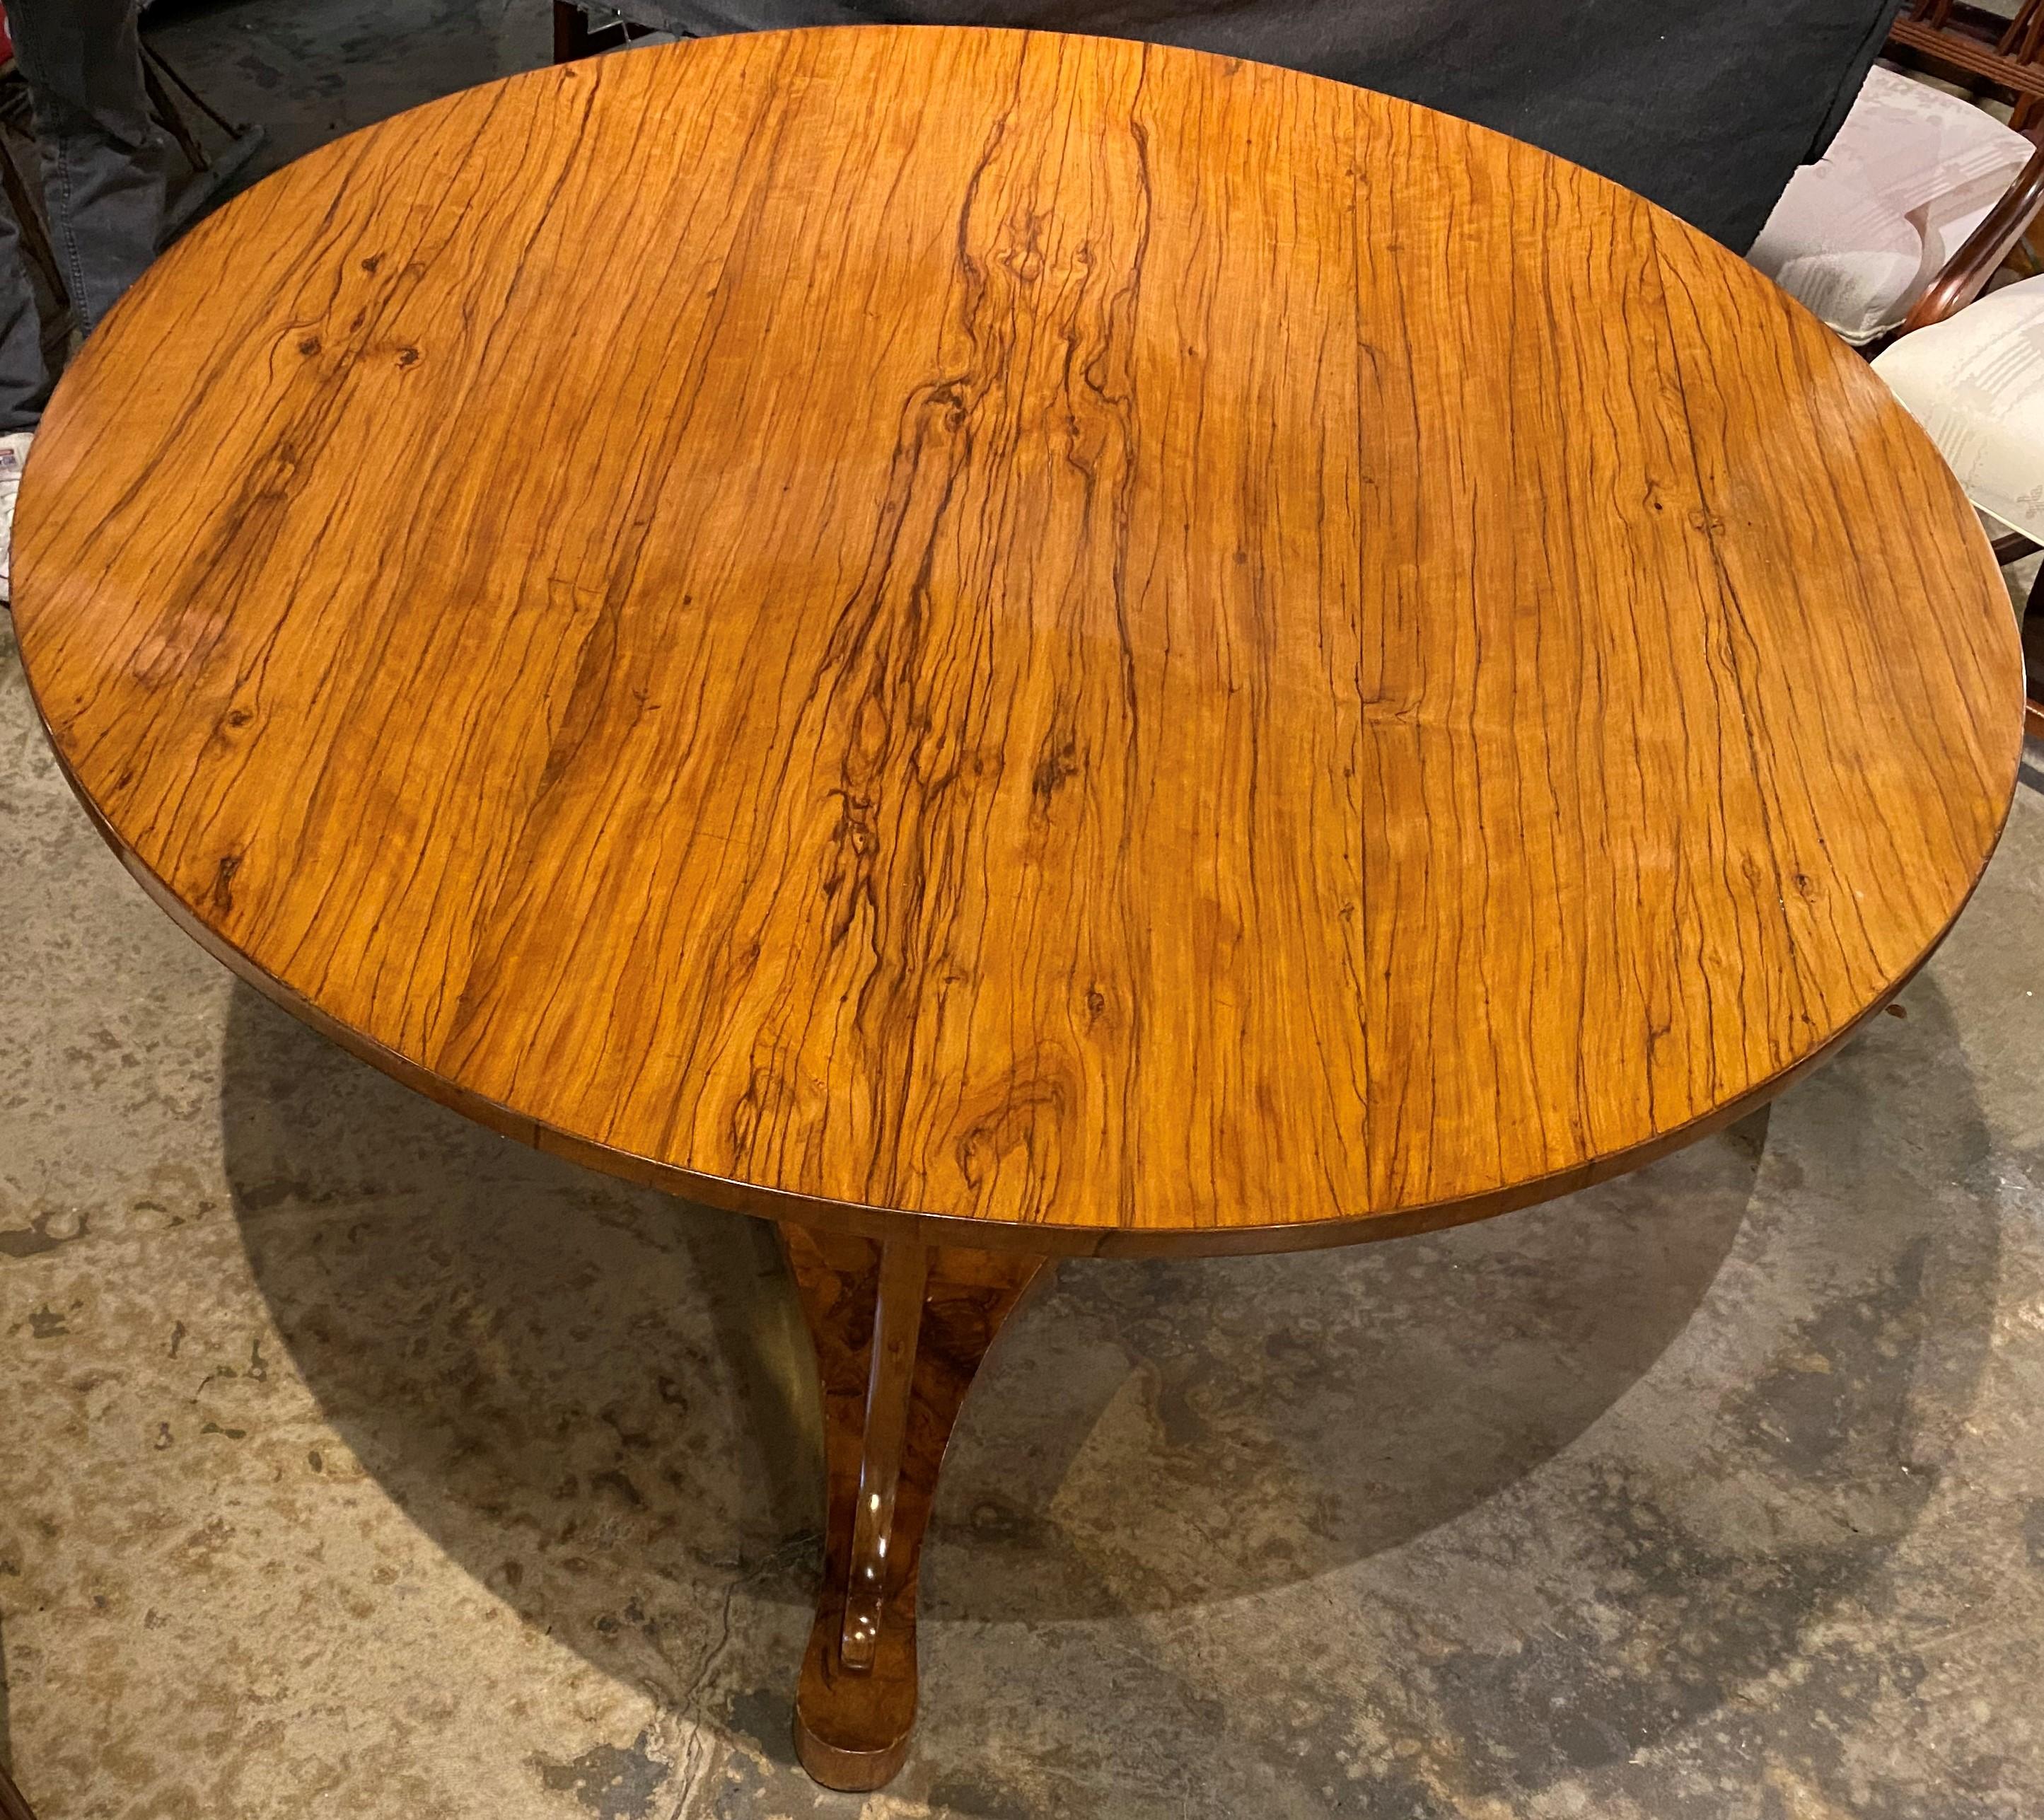 A fine Biedermeier fruitwood round center table with spectacular veneers, supported by a center pedestal with tripod cabriole legs attached to a triangular base stretcher. The table is Austrian in origin, dating to the 19th century, in very good